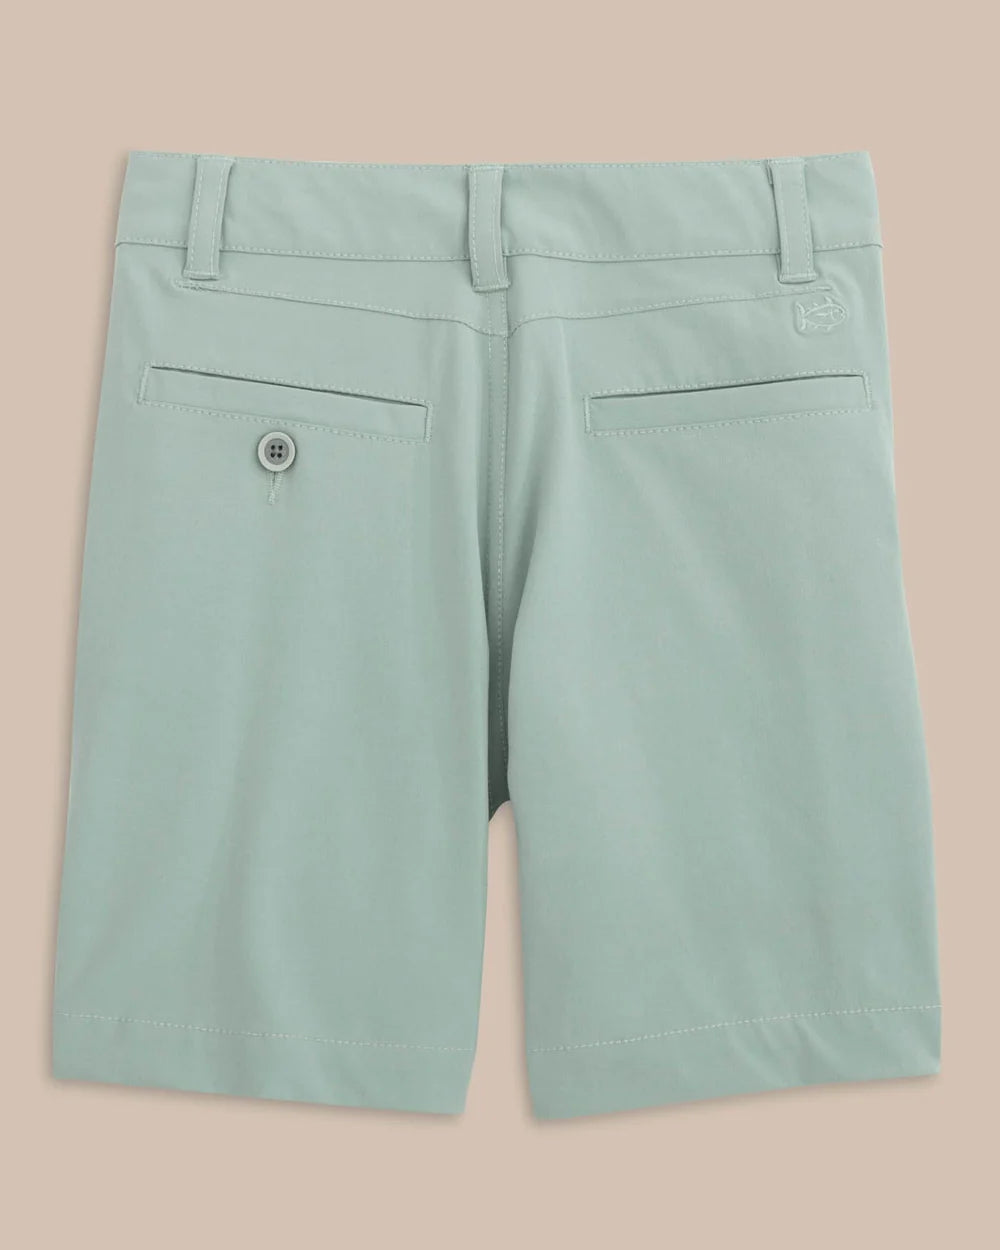 Southern Tide T3 Gulf Shorts in Green Surf